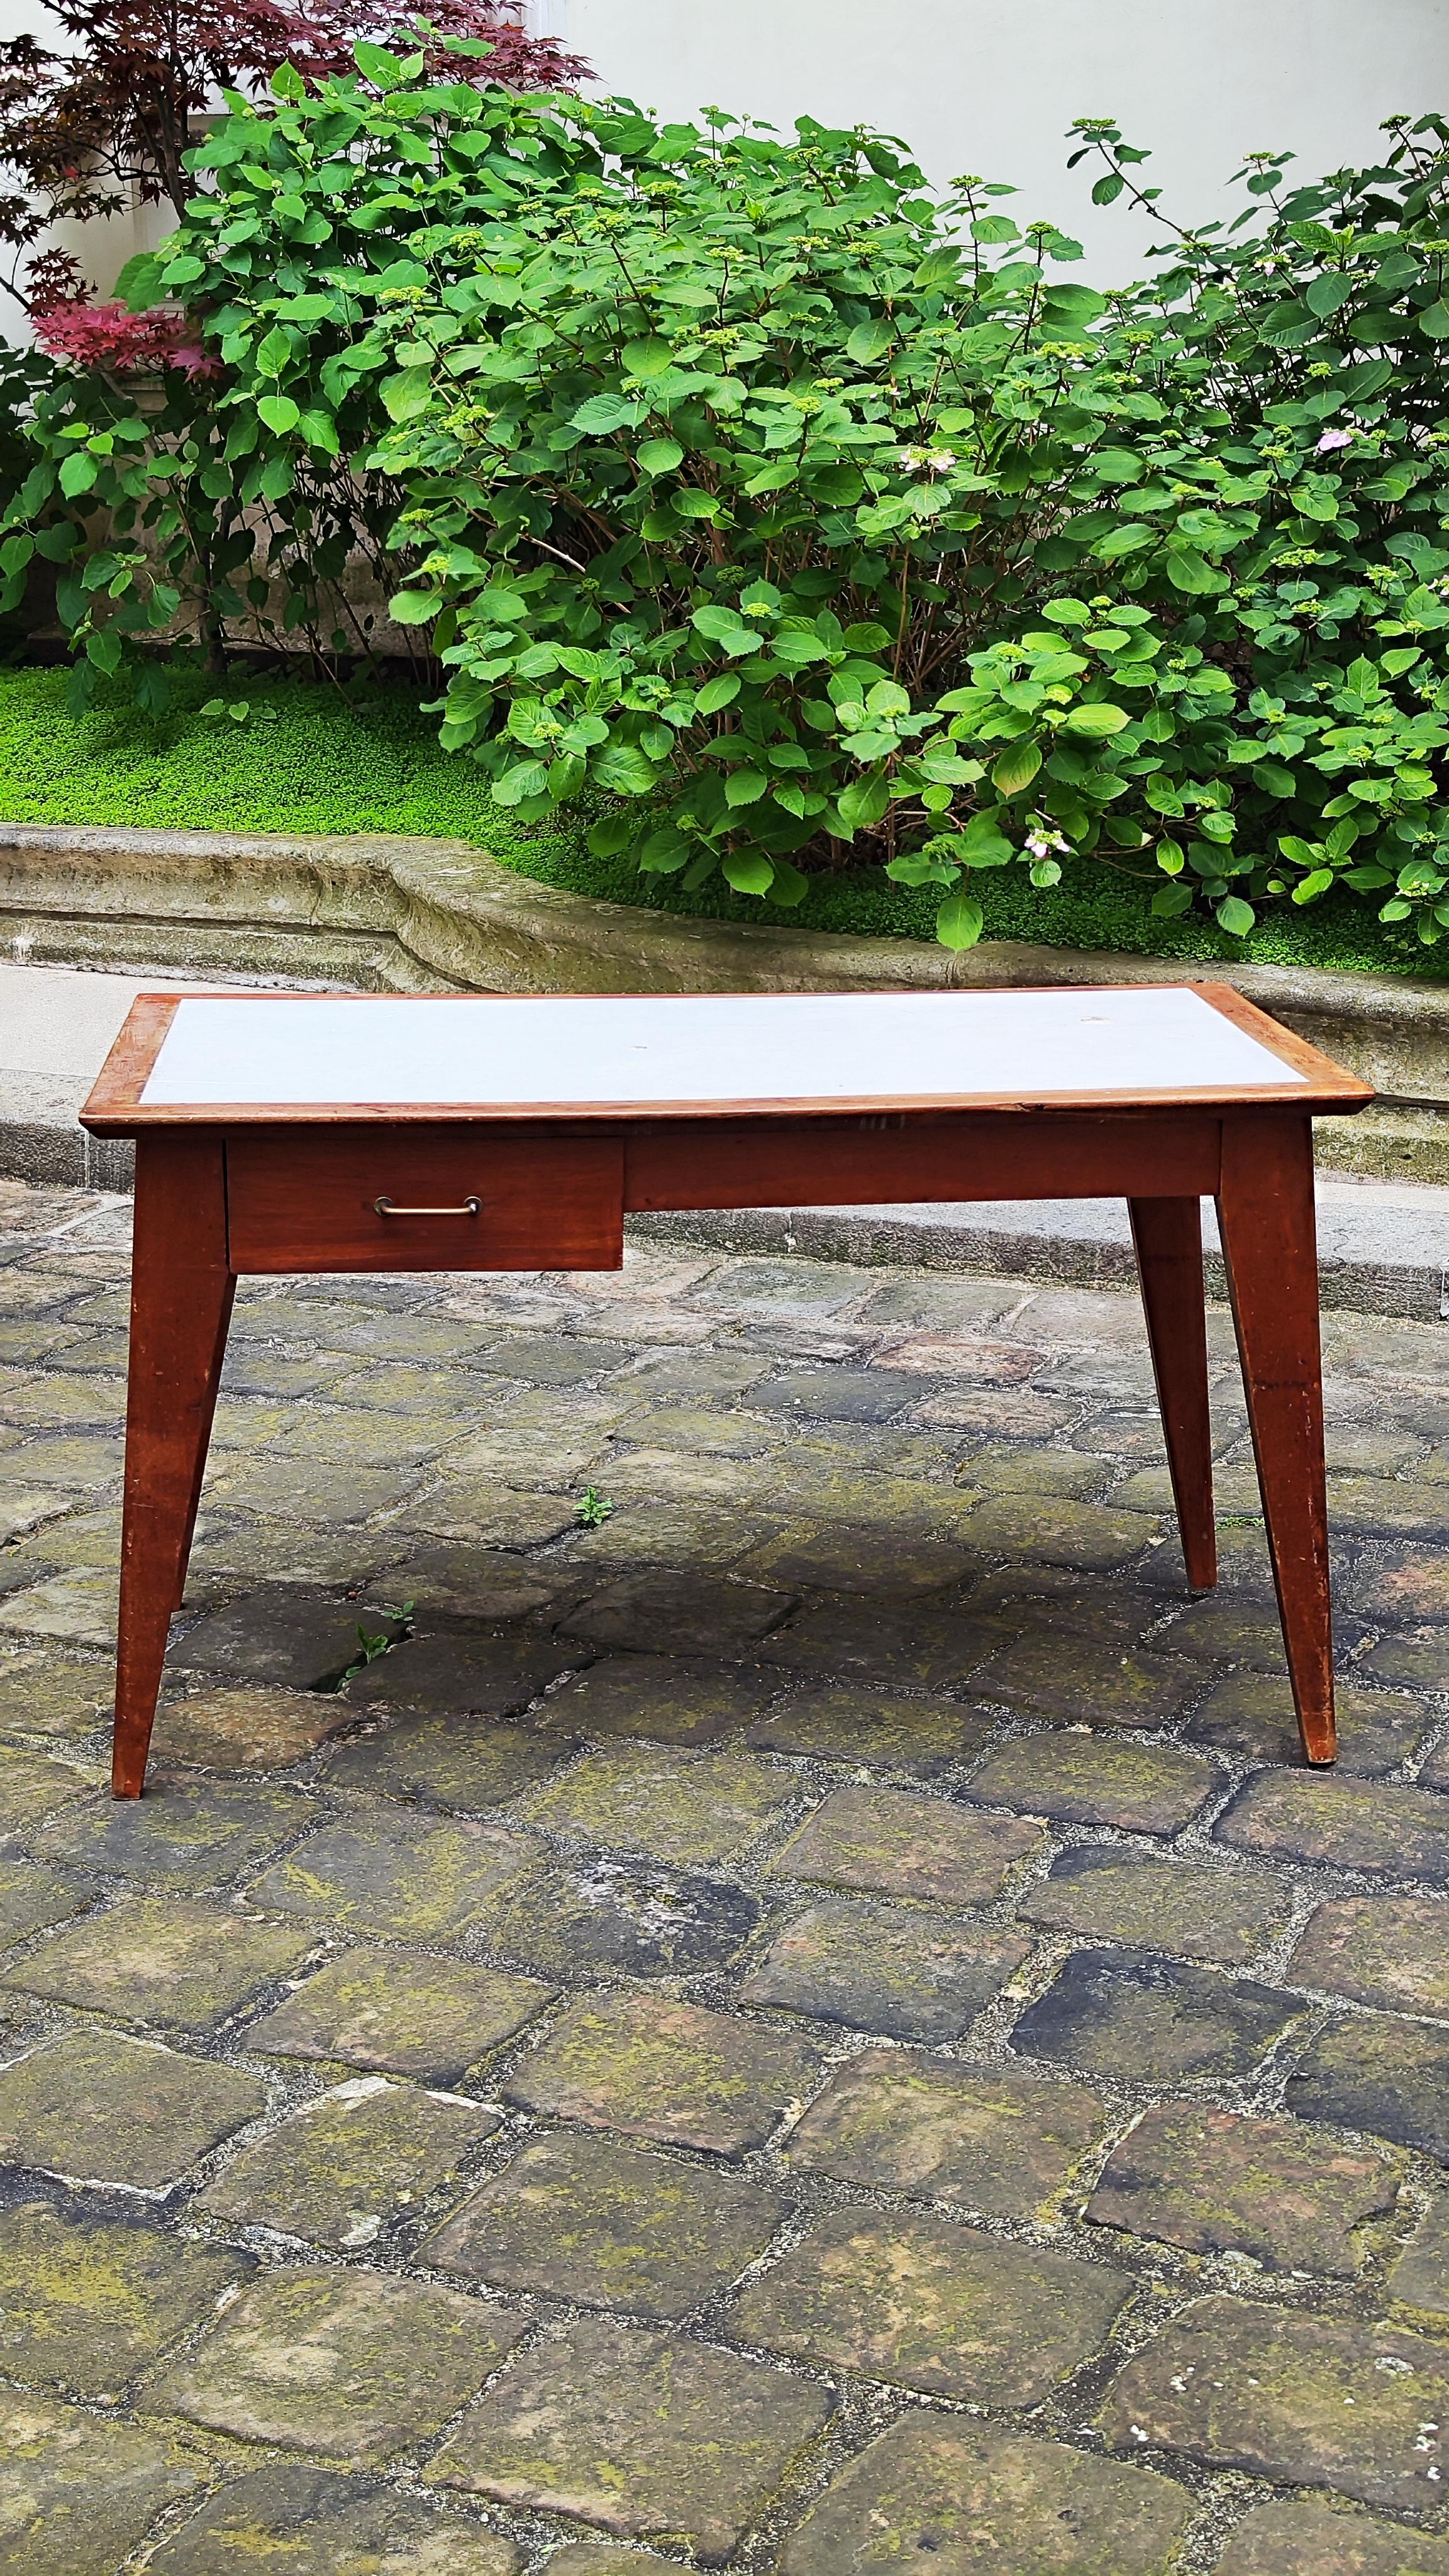 Beech Desk University Residence in France, Jean Zay, 1950, Roger Landault

Very very rare Furniture having equipped a university residence in France.
.
Flat desk in stained beech and opening with a fully painted side drawer ; melamine top. 
.
The